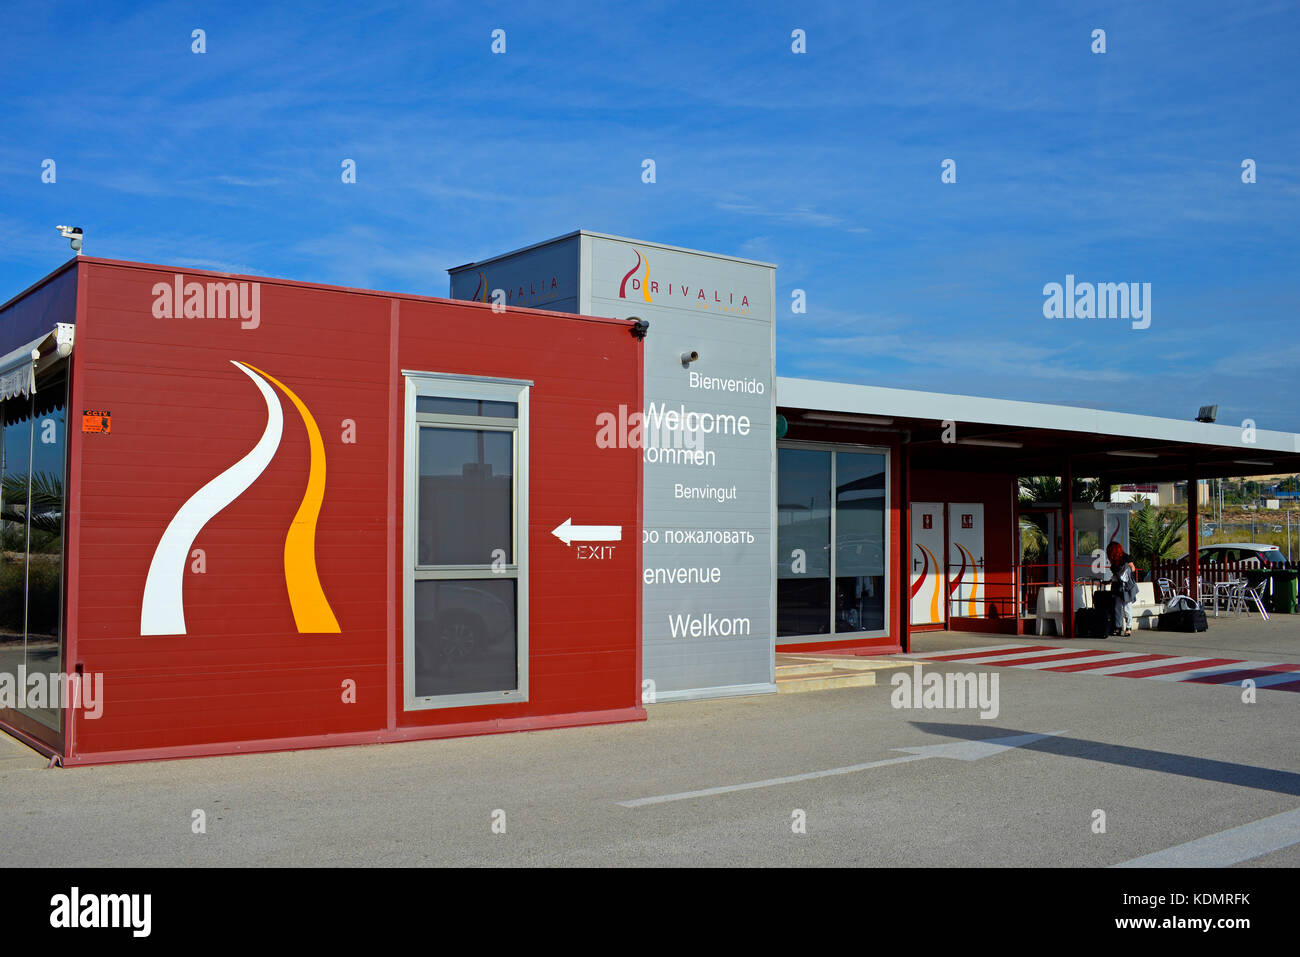 Drivalia car hire office at Alicante Airport Spain. Vehicle hire. Welcome in various languages. Customer toilets. Waiting area. Blue sky Stock Photo